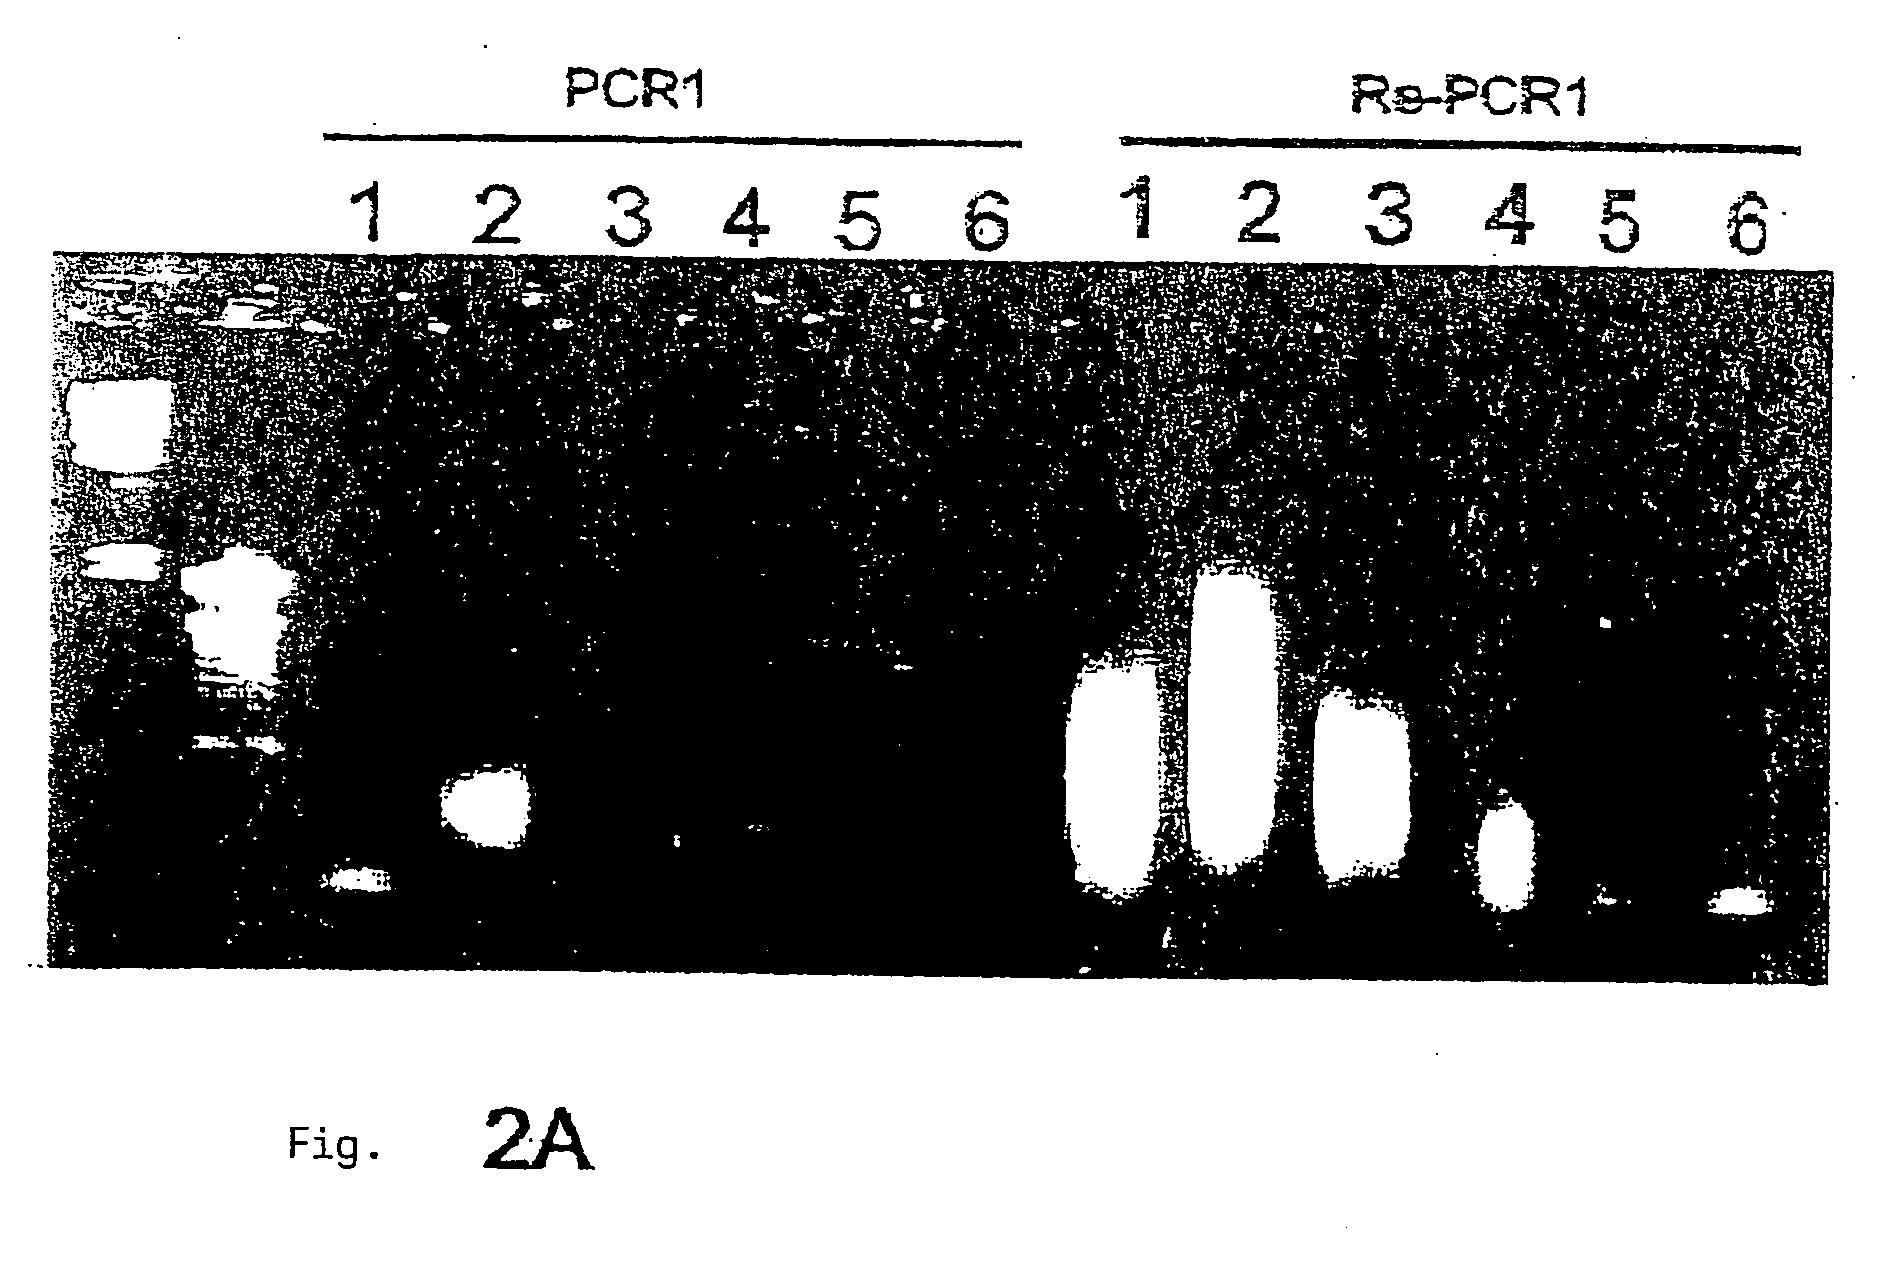 Method for identifying biologically active structures of microbial pathogens